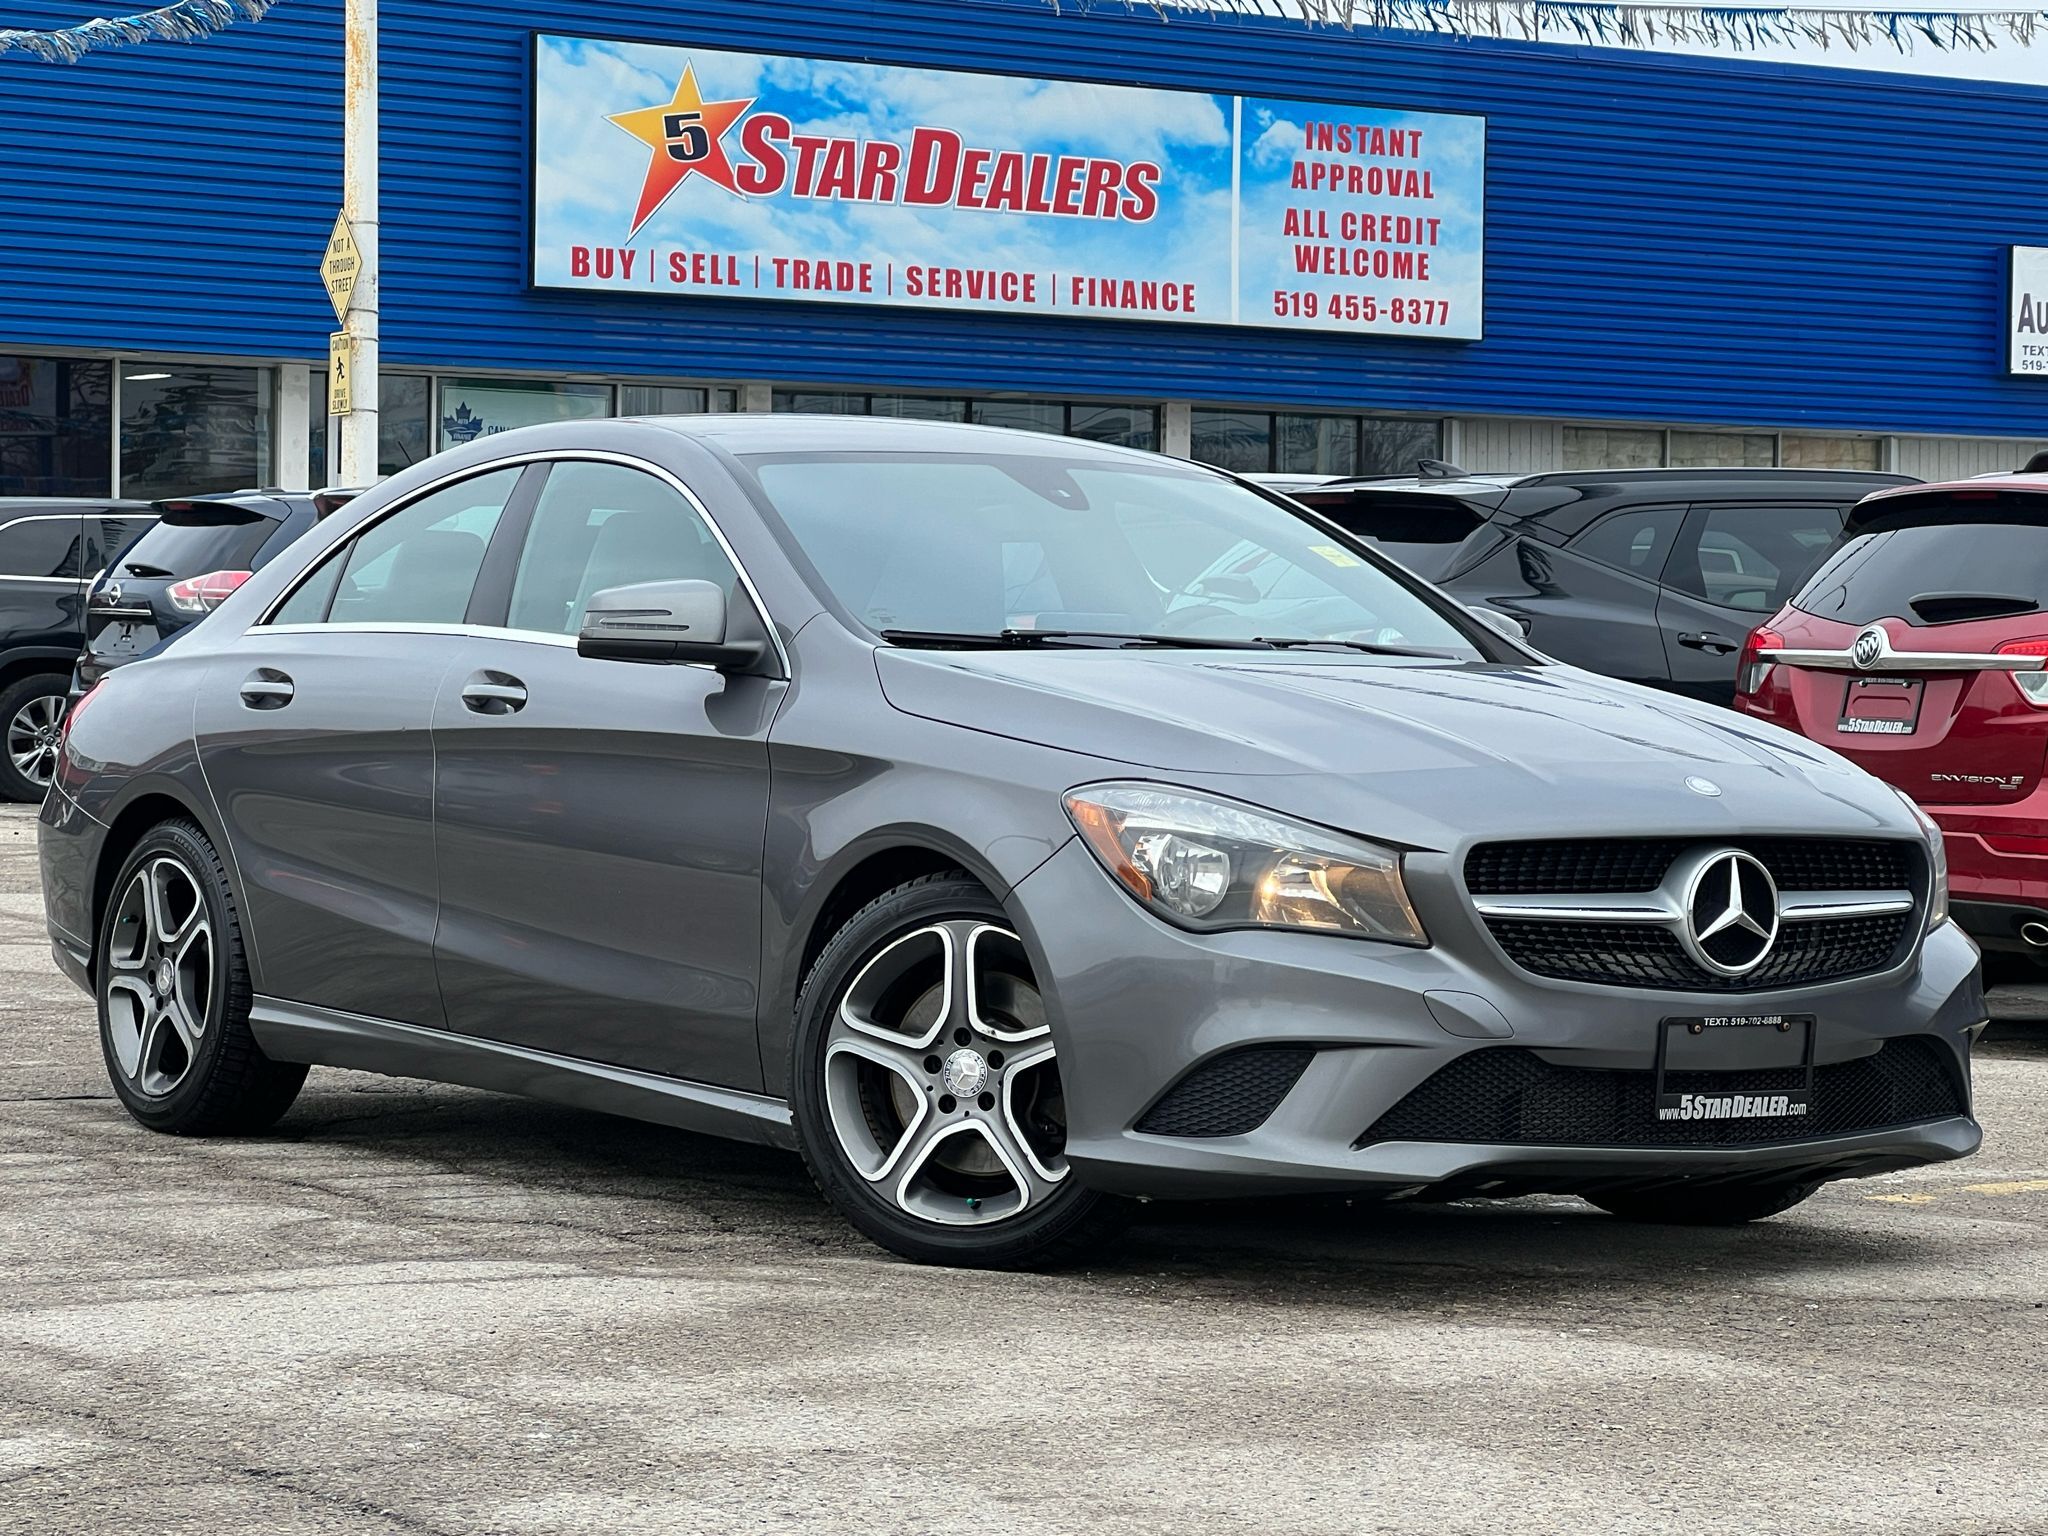 2015 Mercedes-Benz CLA-Class NAV LEATHER H-SEATS LOADED! WE FINANCE ALL CREDIT!